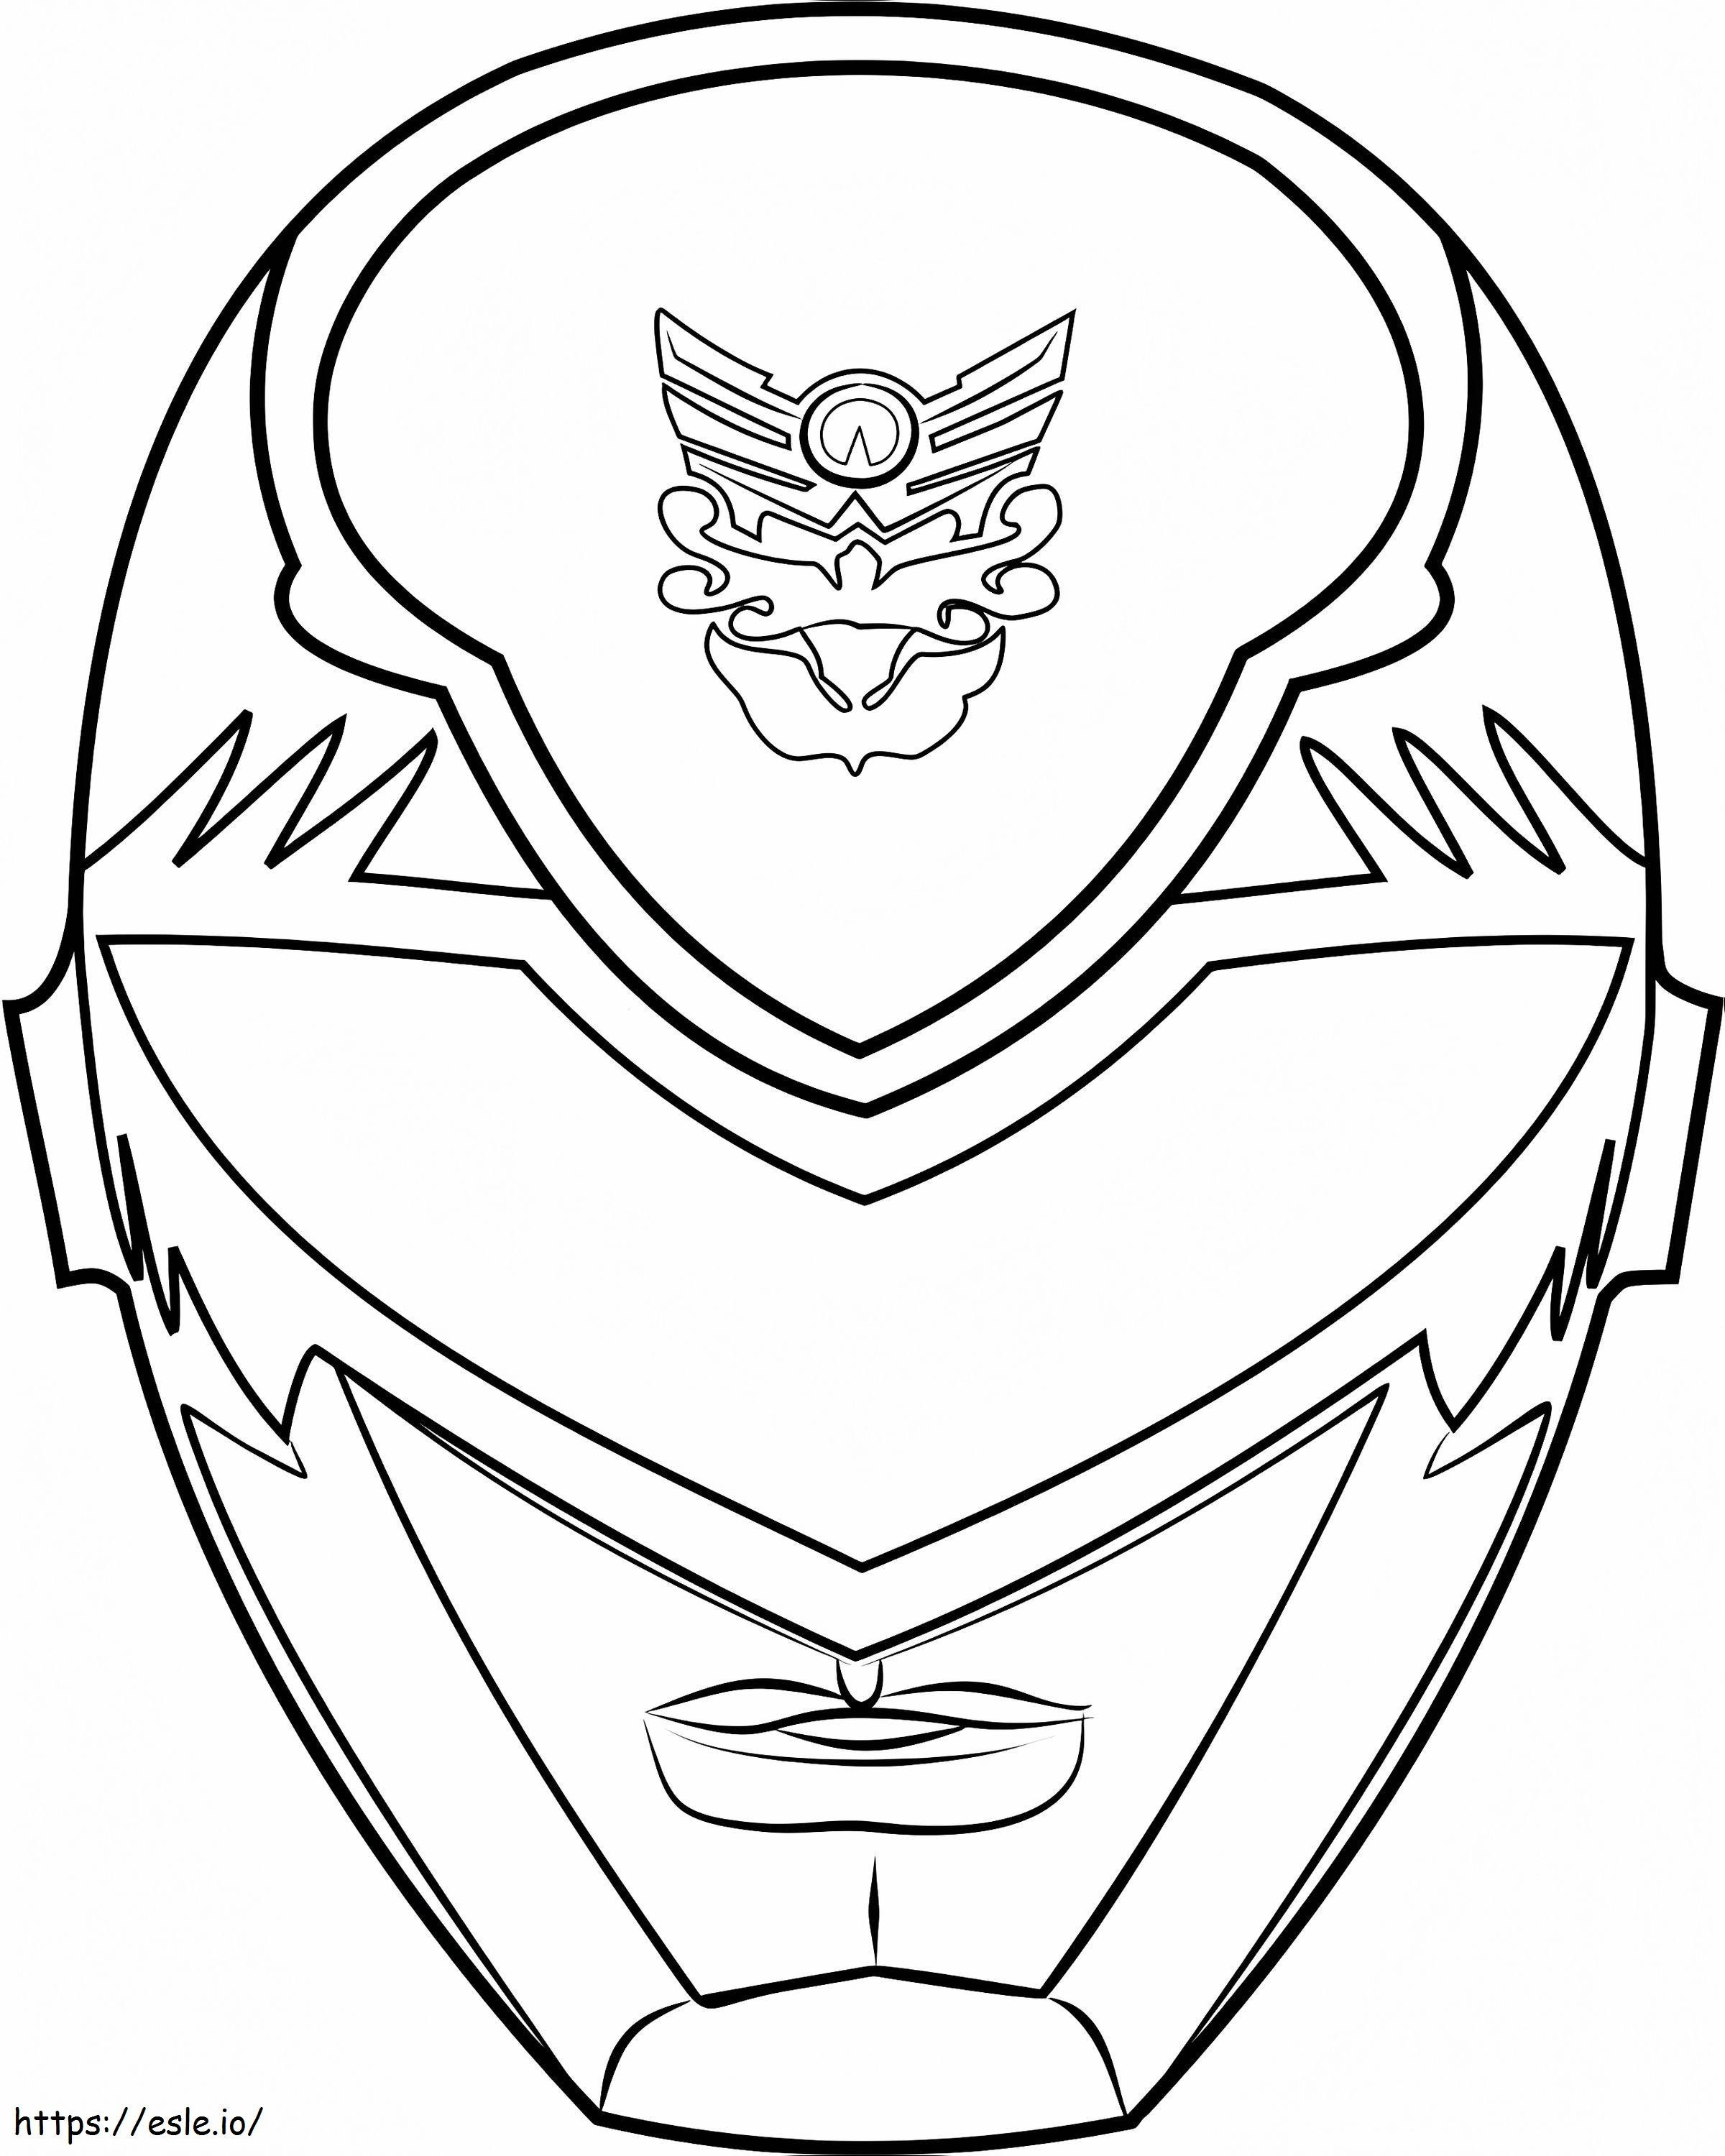 1530501643Power Ranger Mask1 coloring page